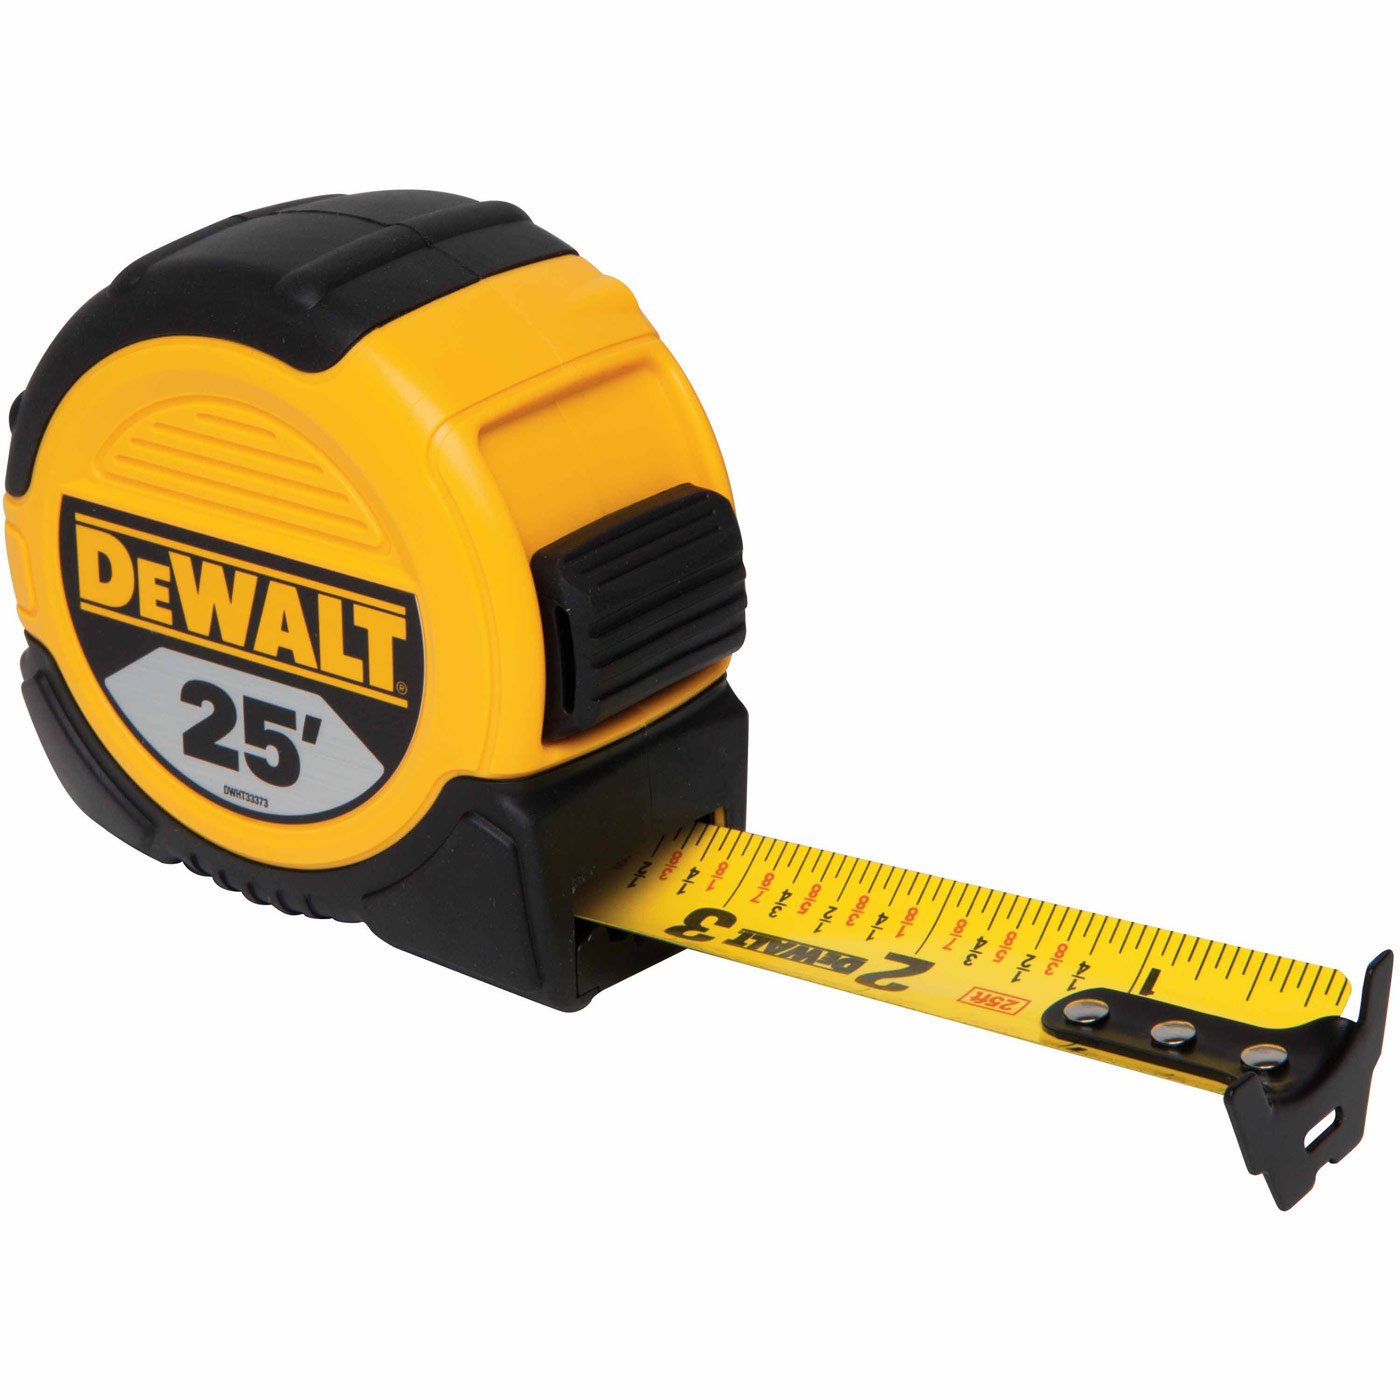 DEWALT DWHT33373L 1 1/8-Inch x 25-Foot Short Tape, 10-Foot Stand Out